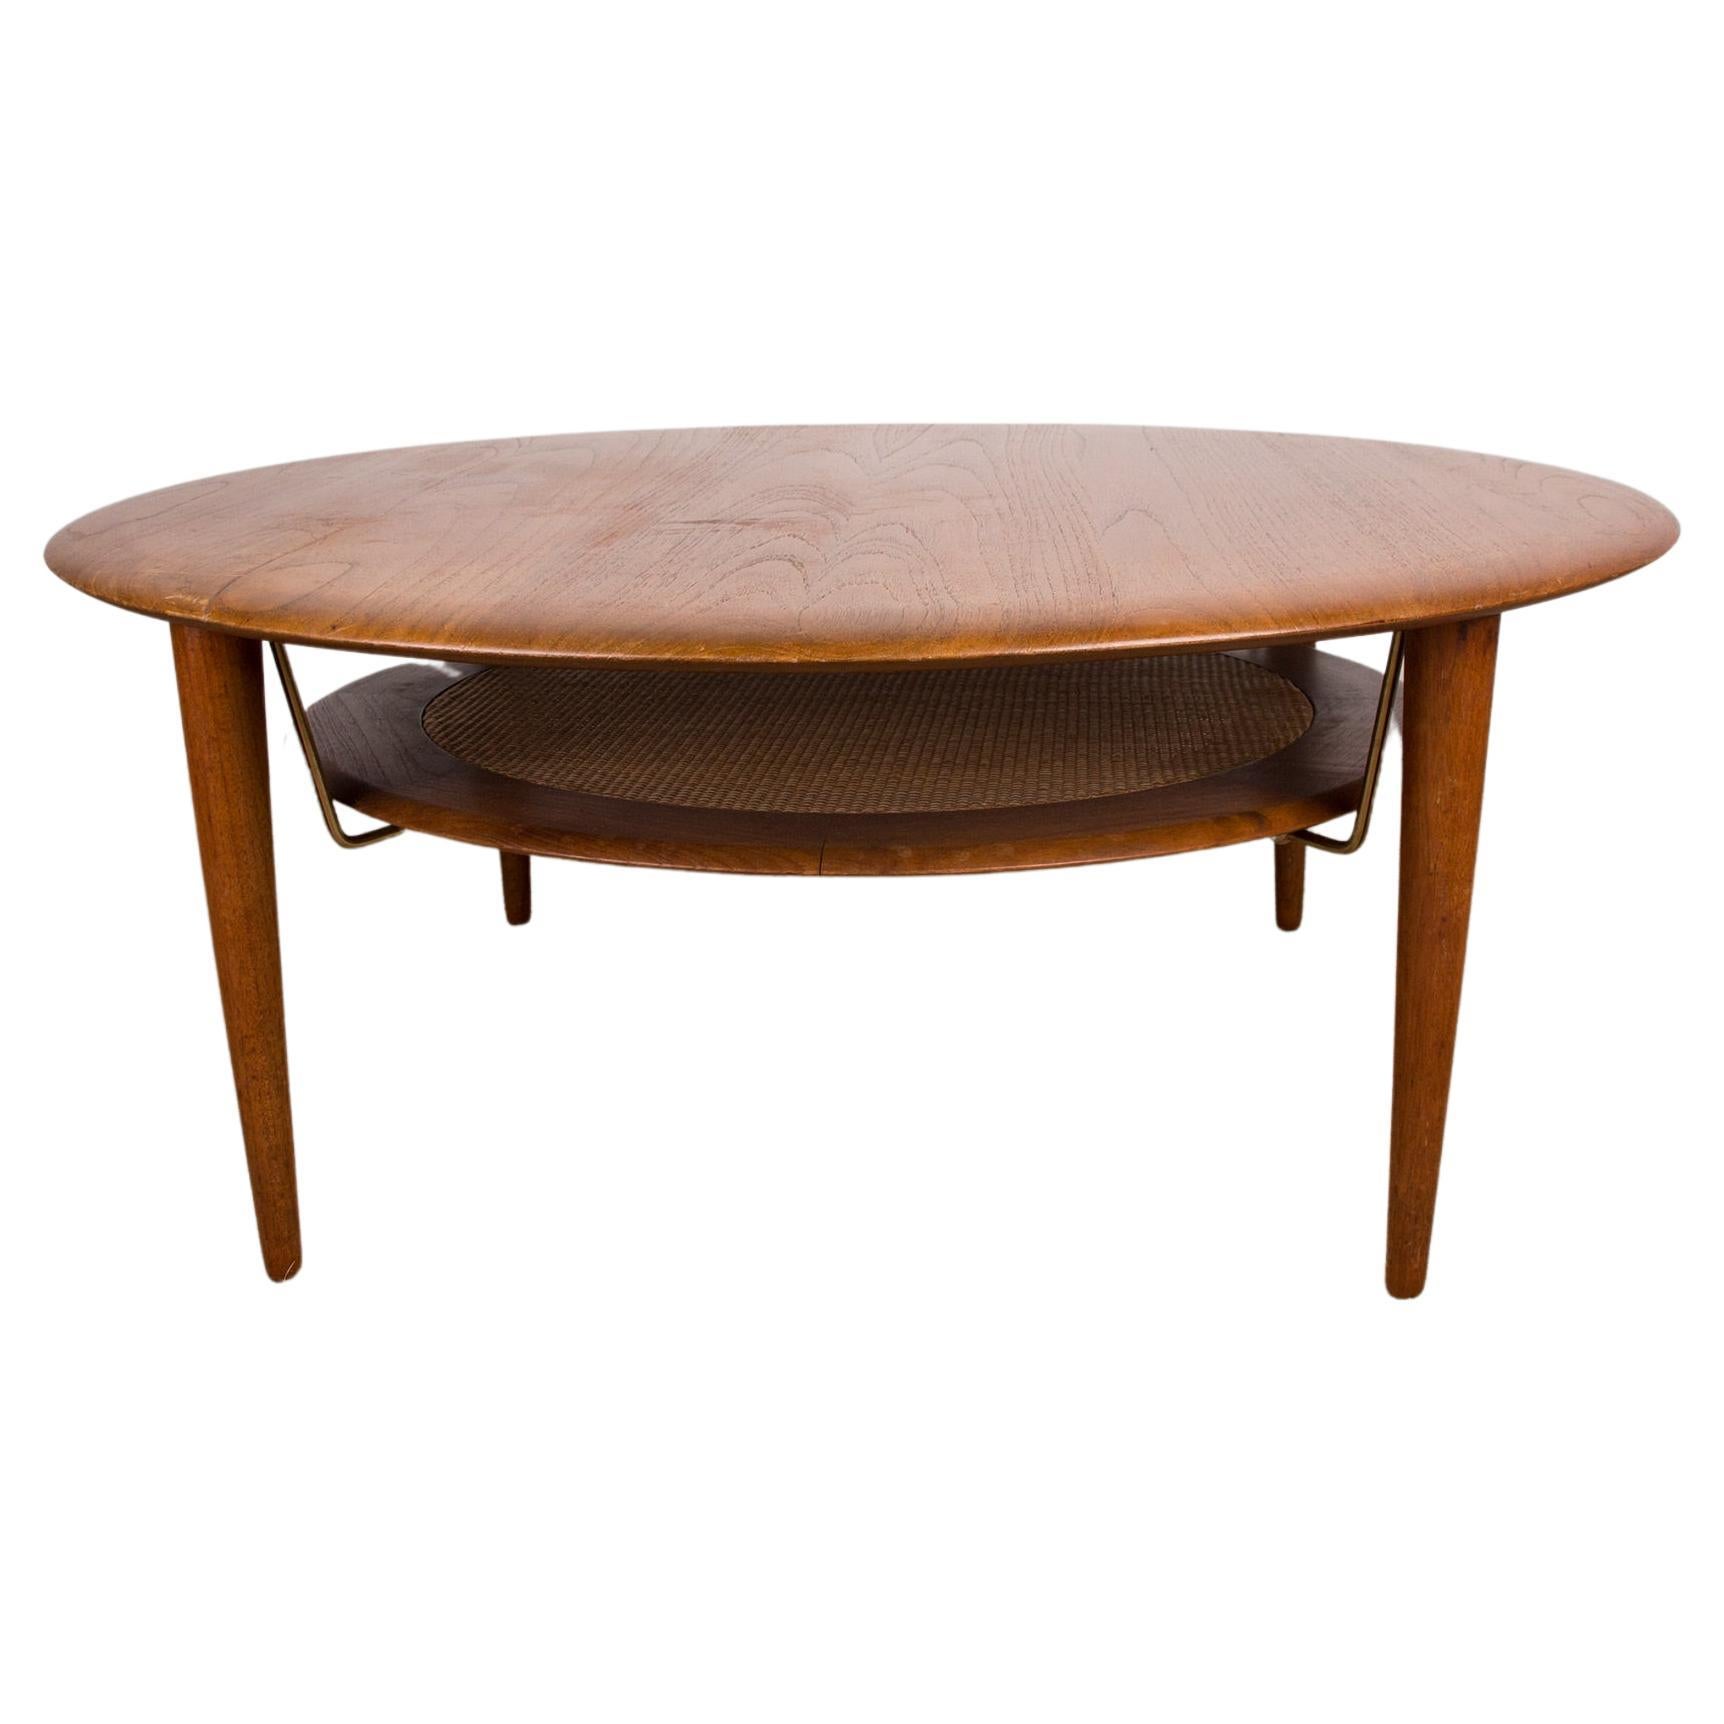 Danish Teak, Brass and Cane FD 515 Round 2-Tier Coffee Table by Peter Hvidt